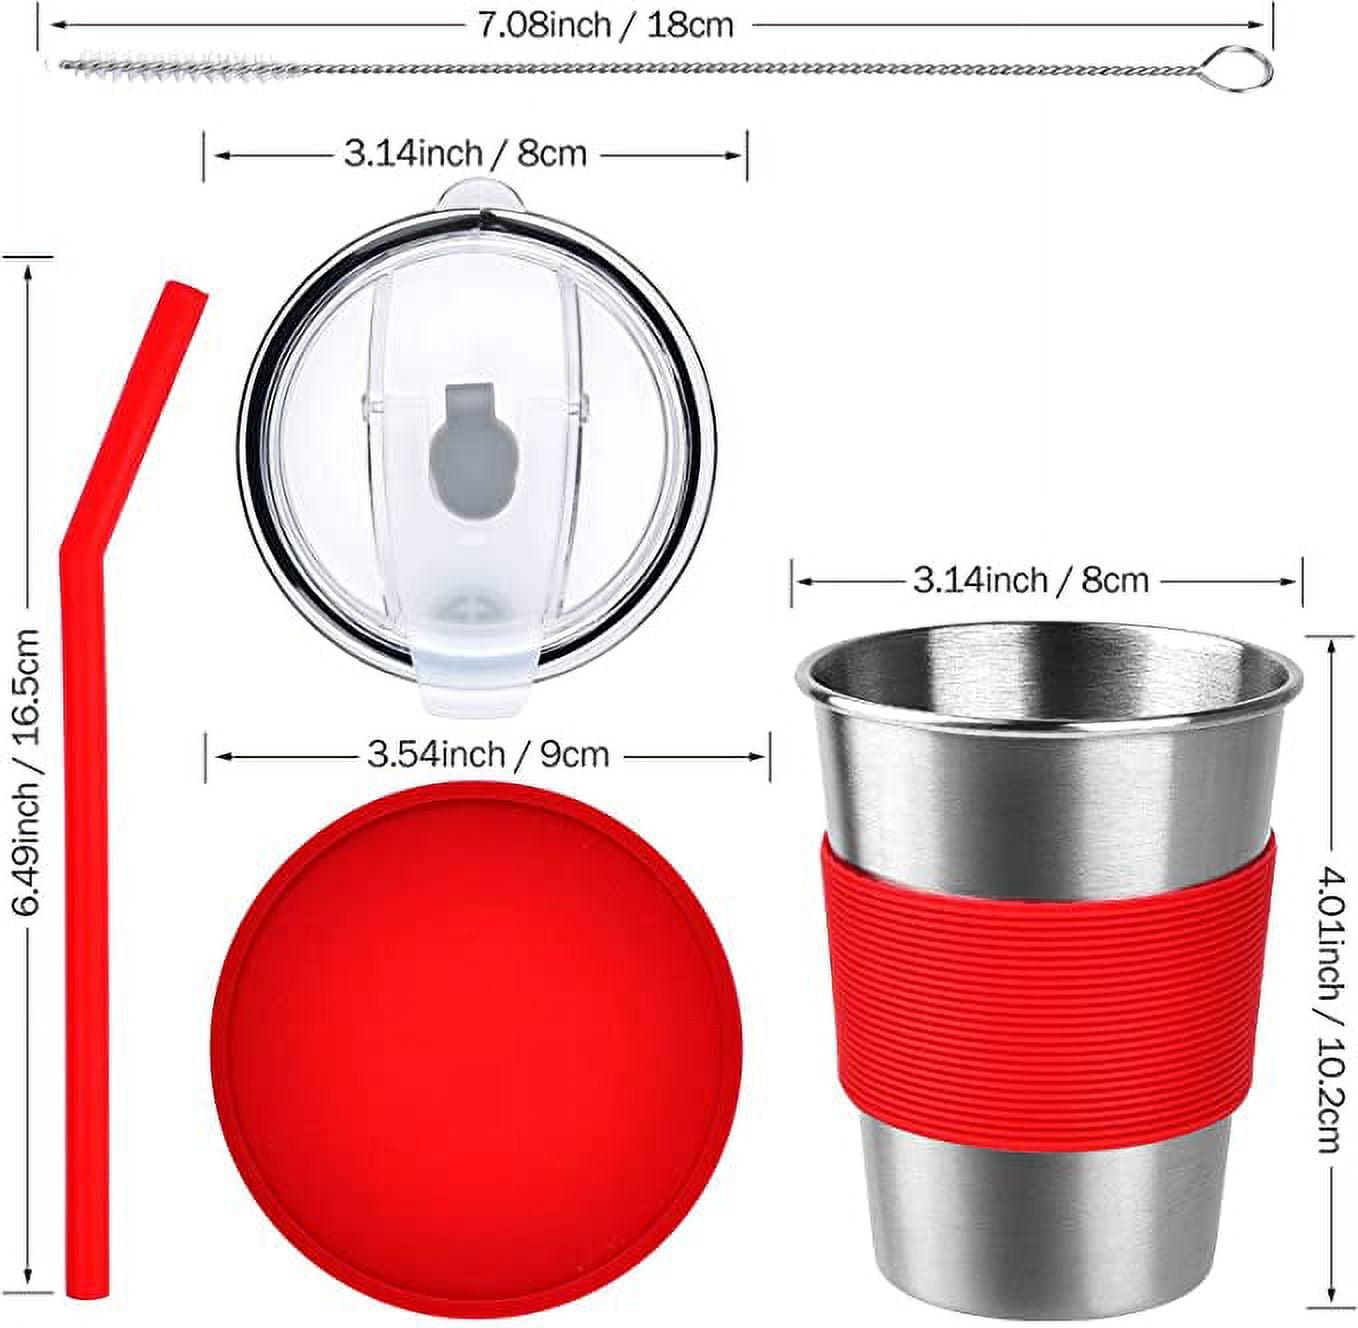 Stainless Steel Kids Cups with Straws and Lids,16oz Spill Proof Kids Tumbler  with Straw,Leak Proof Kids Sippy Cups with Lid,Reusable Metal Kids Drinking  Mug Glasses with Lid for School,Outdoor